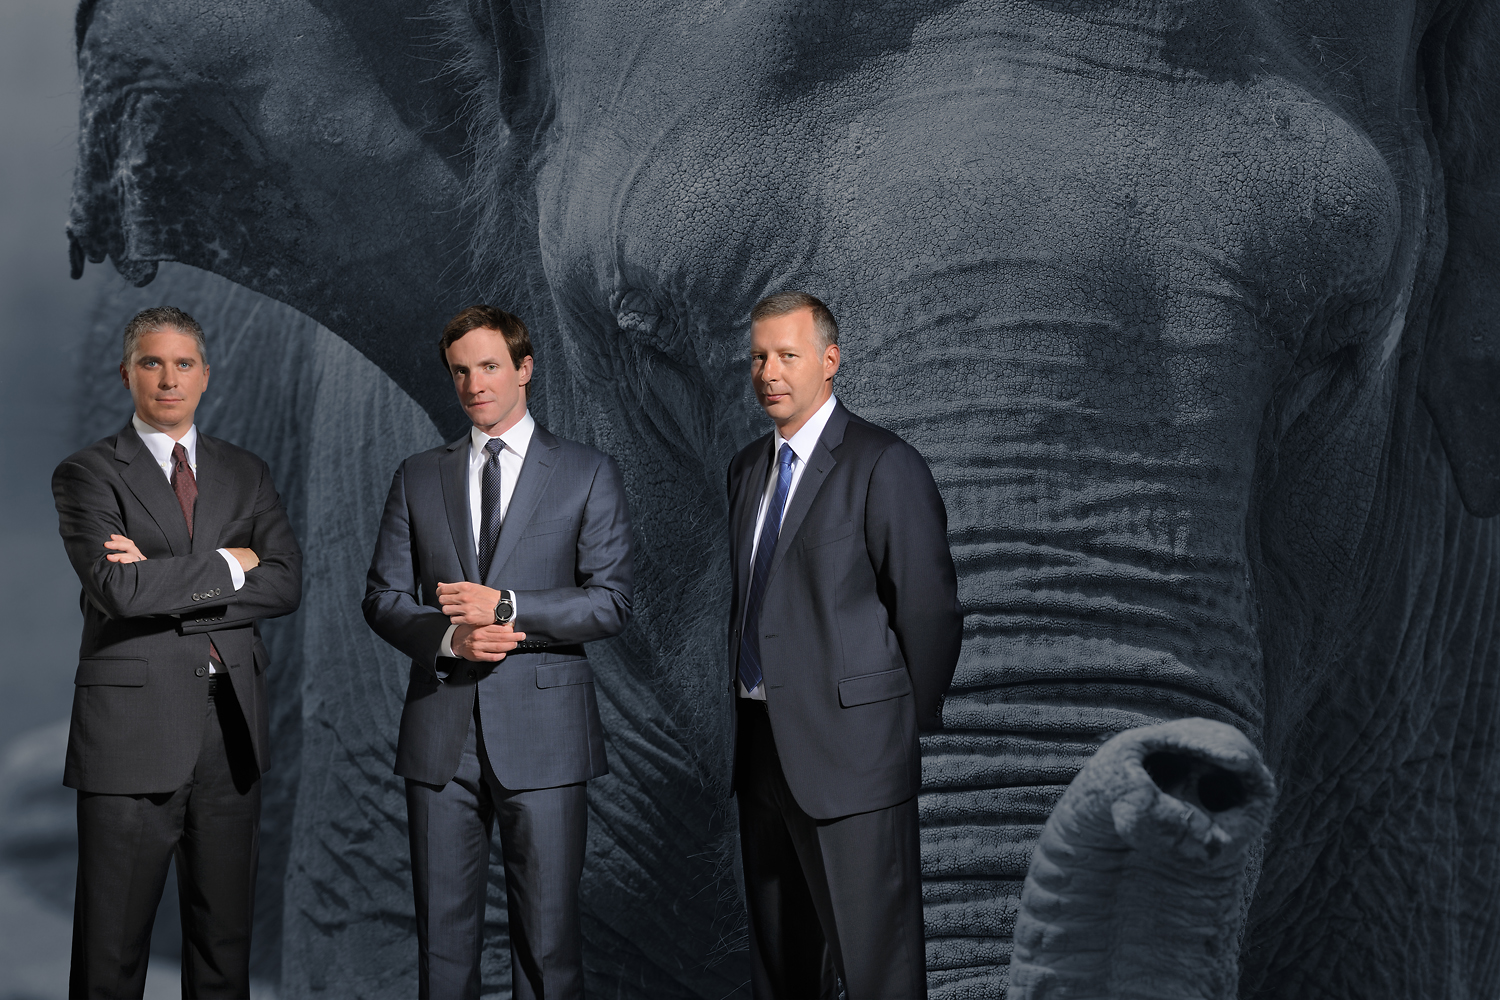   I got to spend an afternoon doing a portrait of an elephant - she was a very willing subject - the guys do&nbsp;serious Big Data  